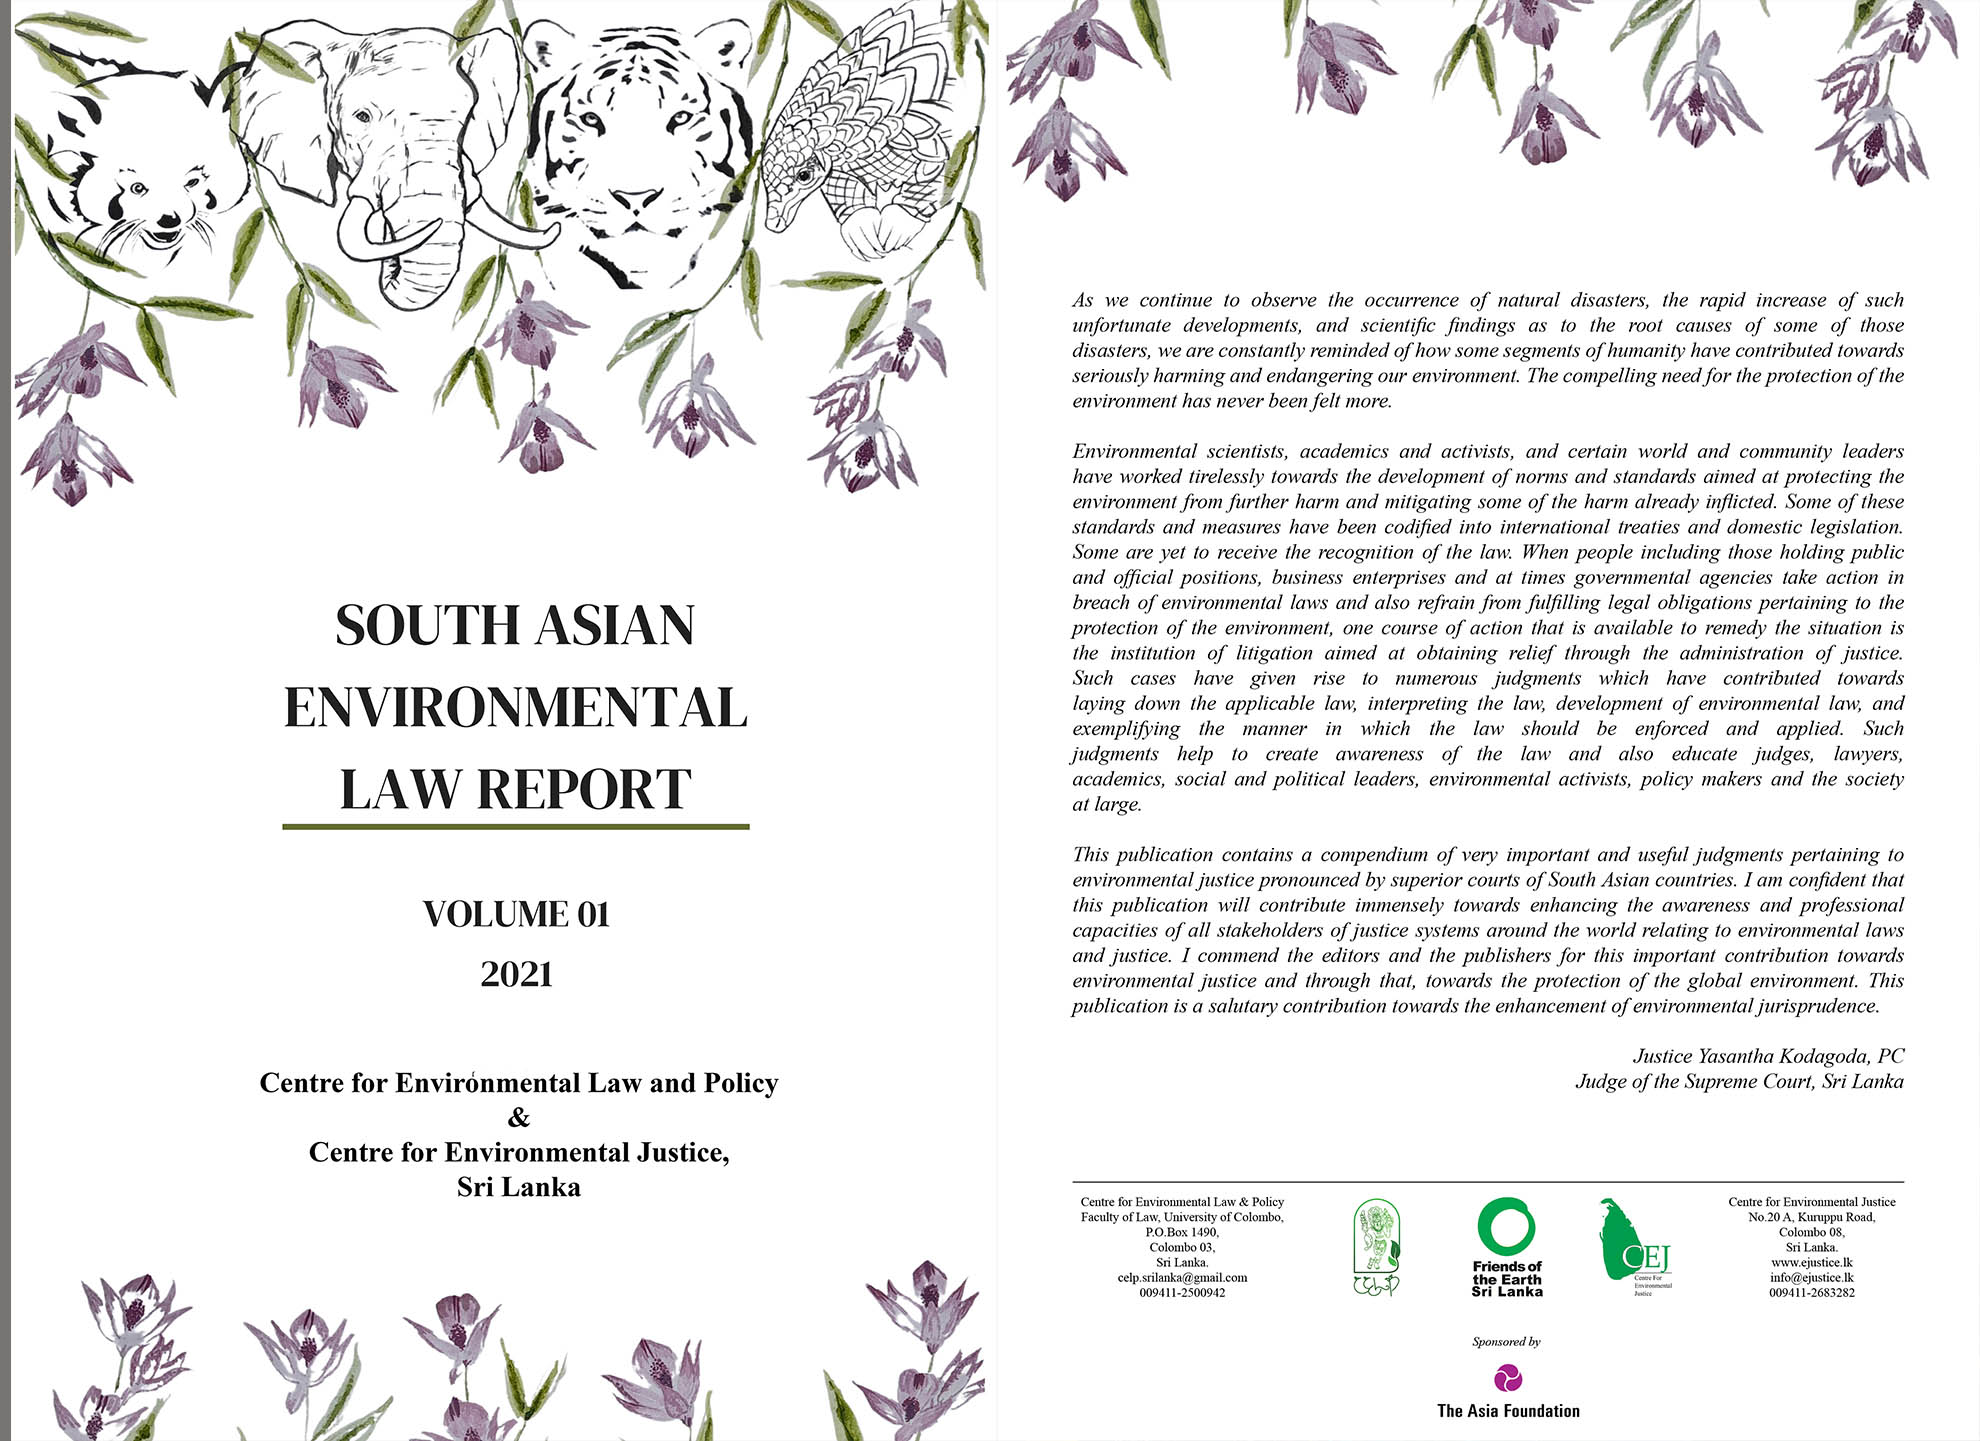 South Asian Environmental Law Report Volume 1